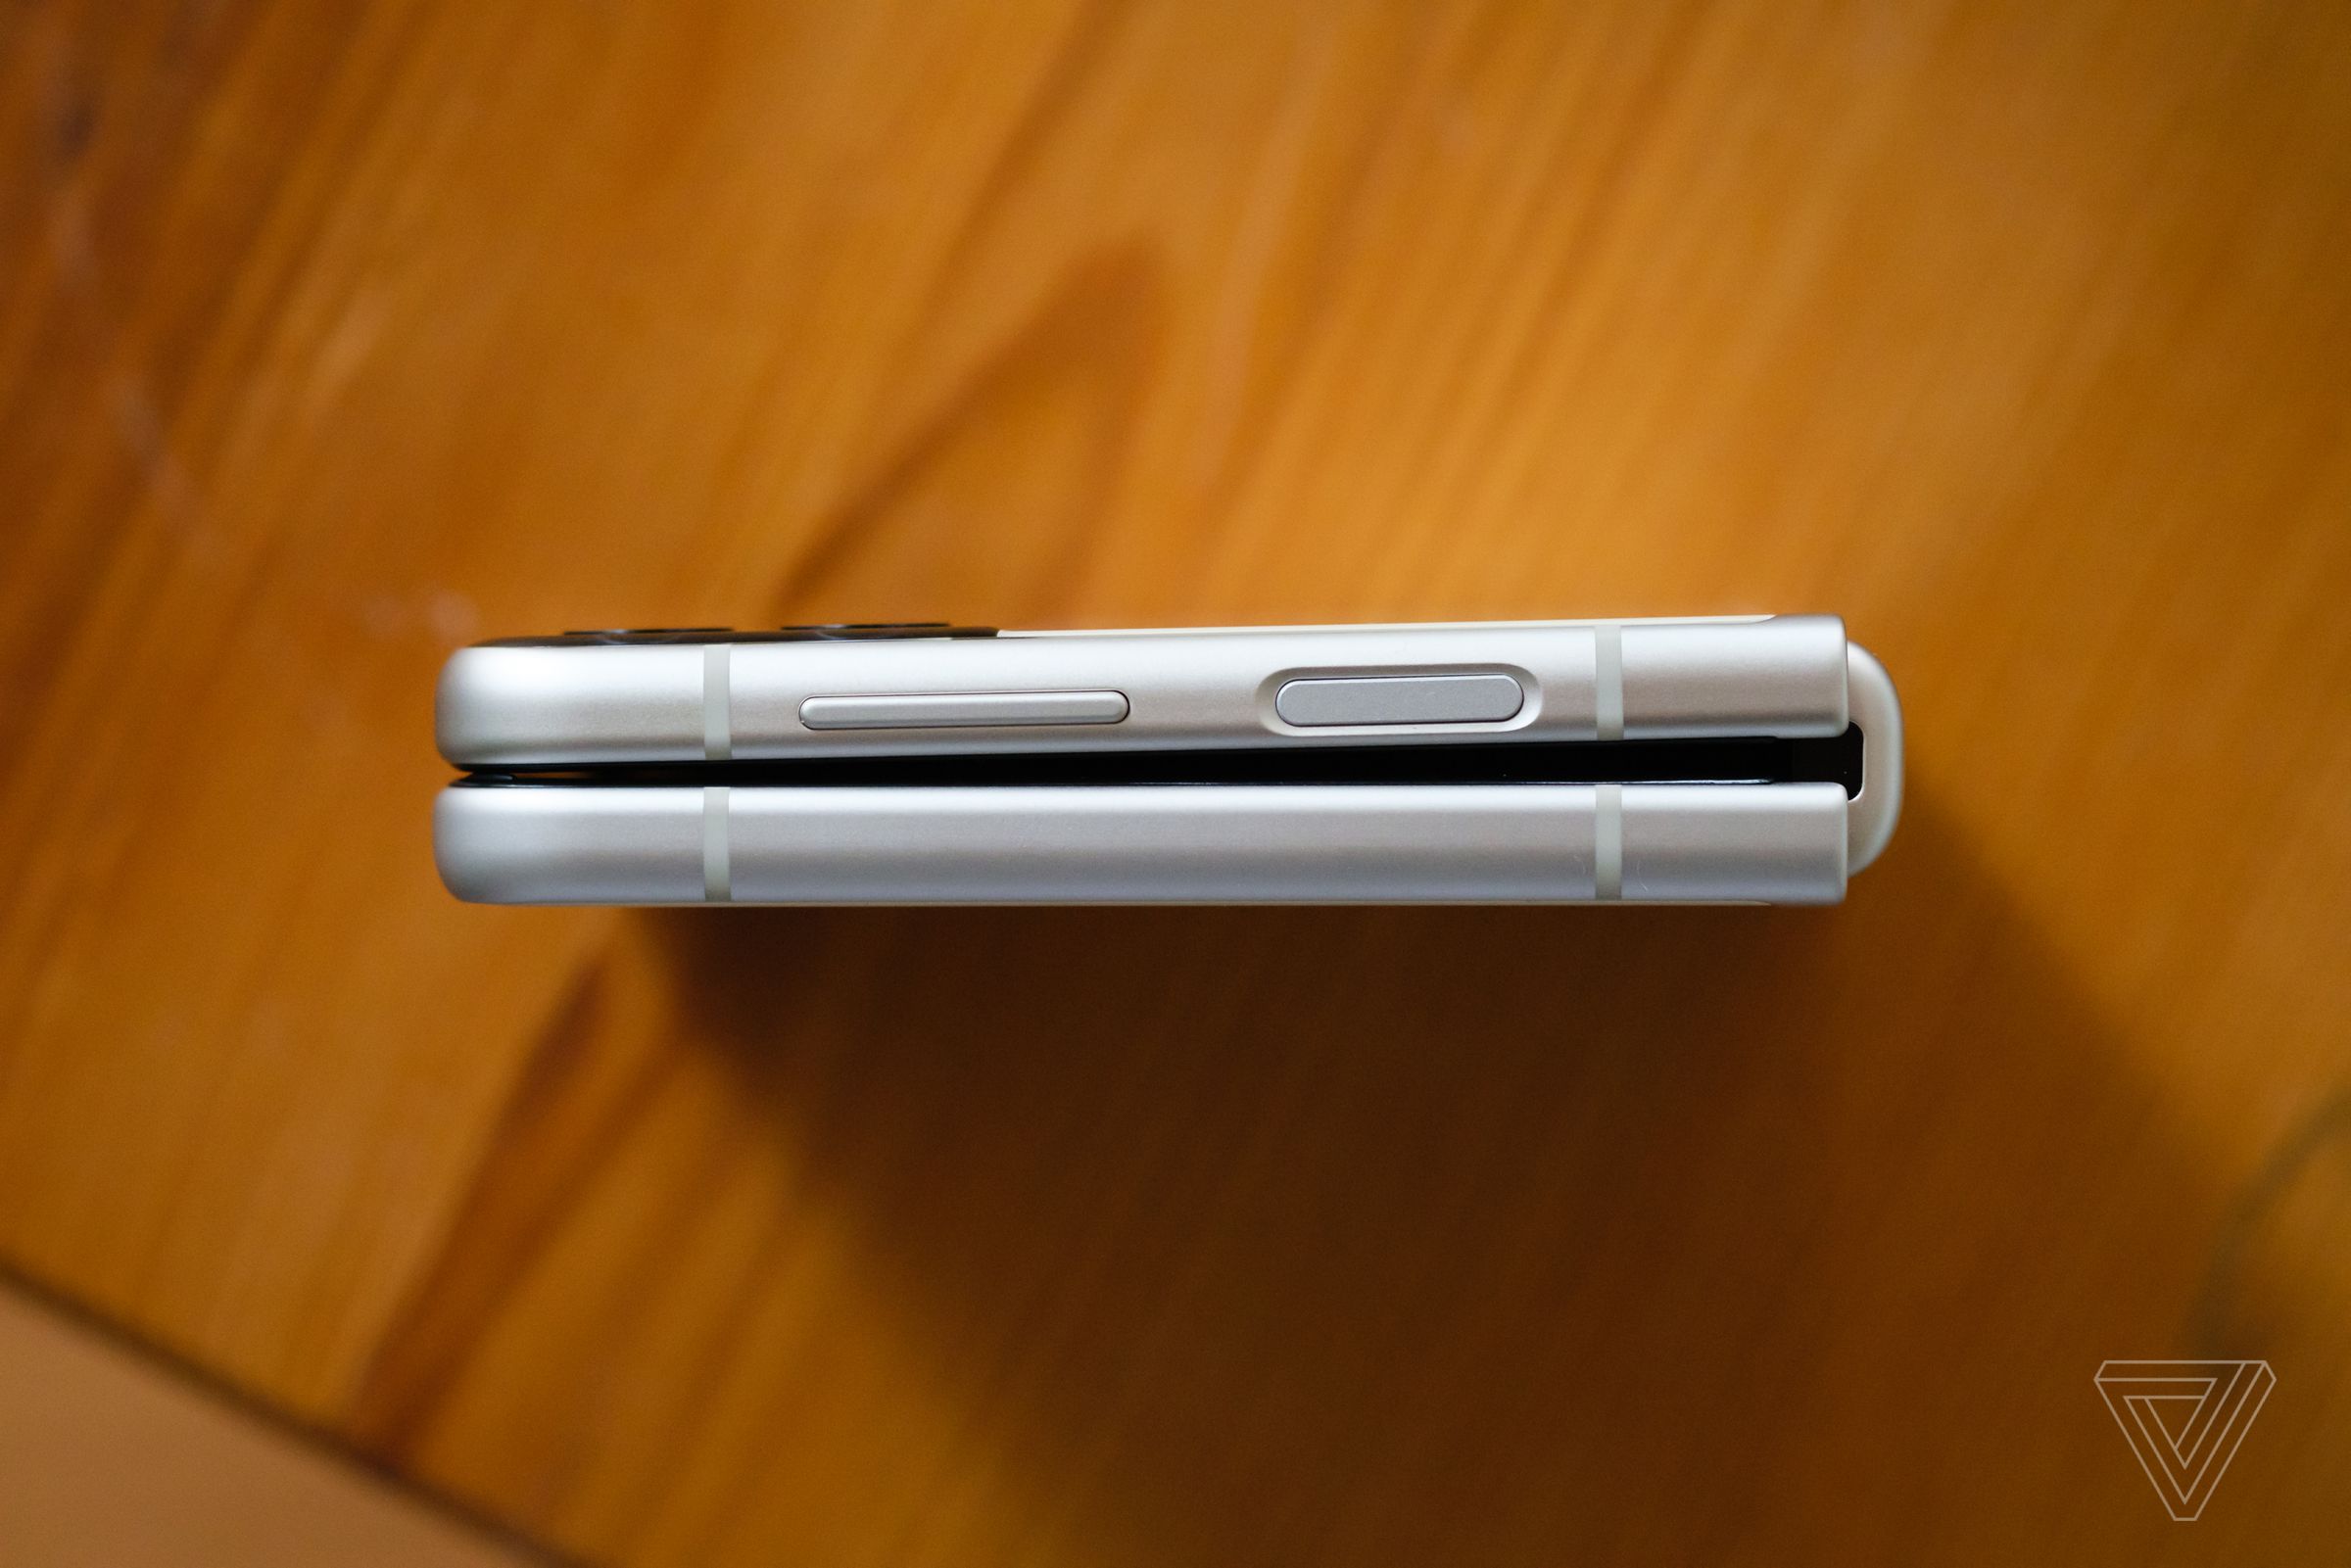 The Z Flip 3 is about as thick as two phones when closed and yes, there’s still a slight gap when it’s closed.